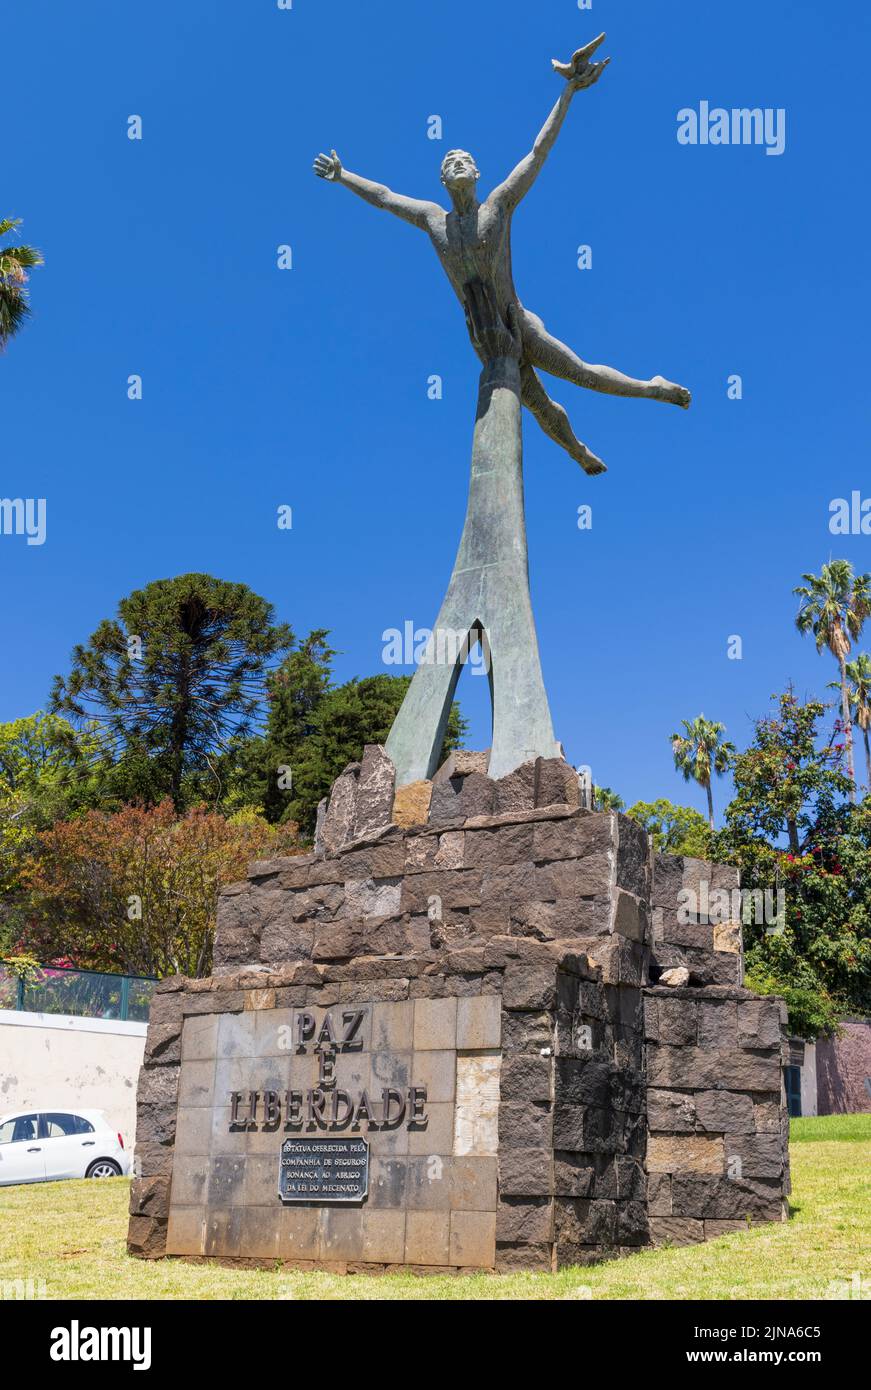 Paz e Liberdade (Peace and Liberty) statue in Funchal, Madeira, Portugal Stock Photo